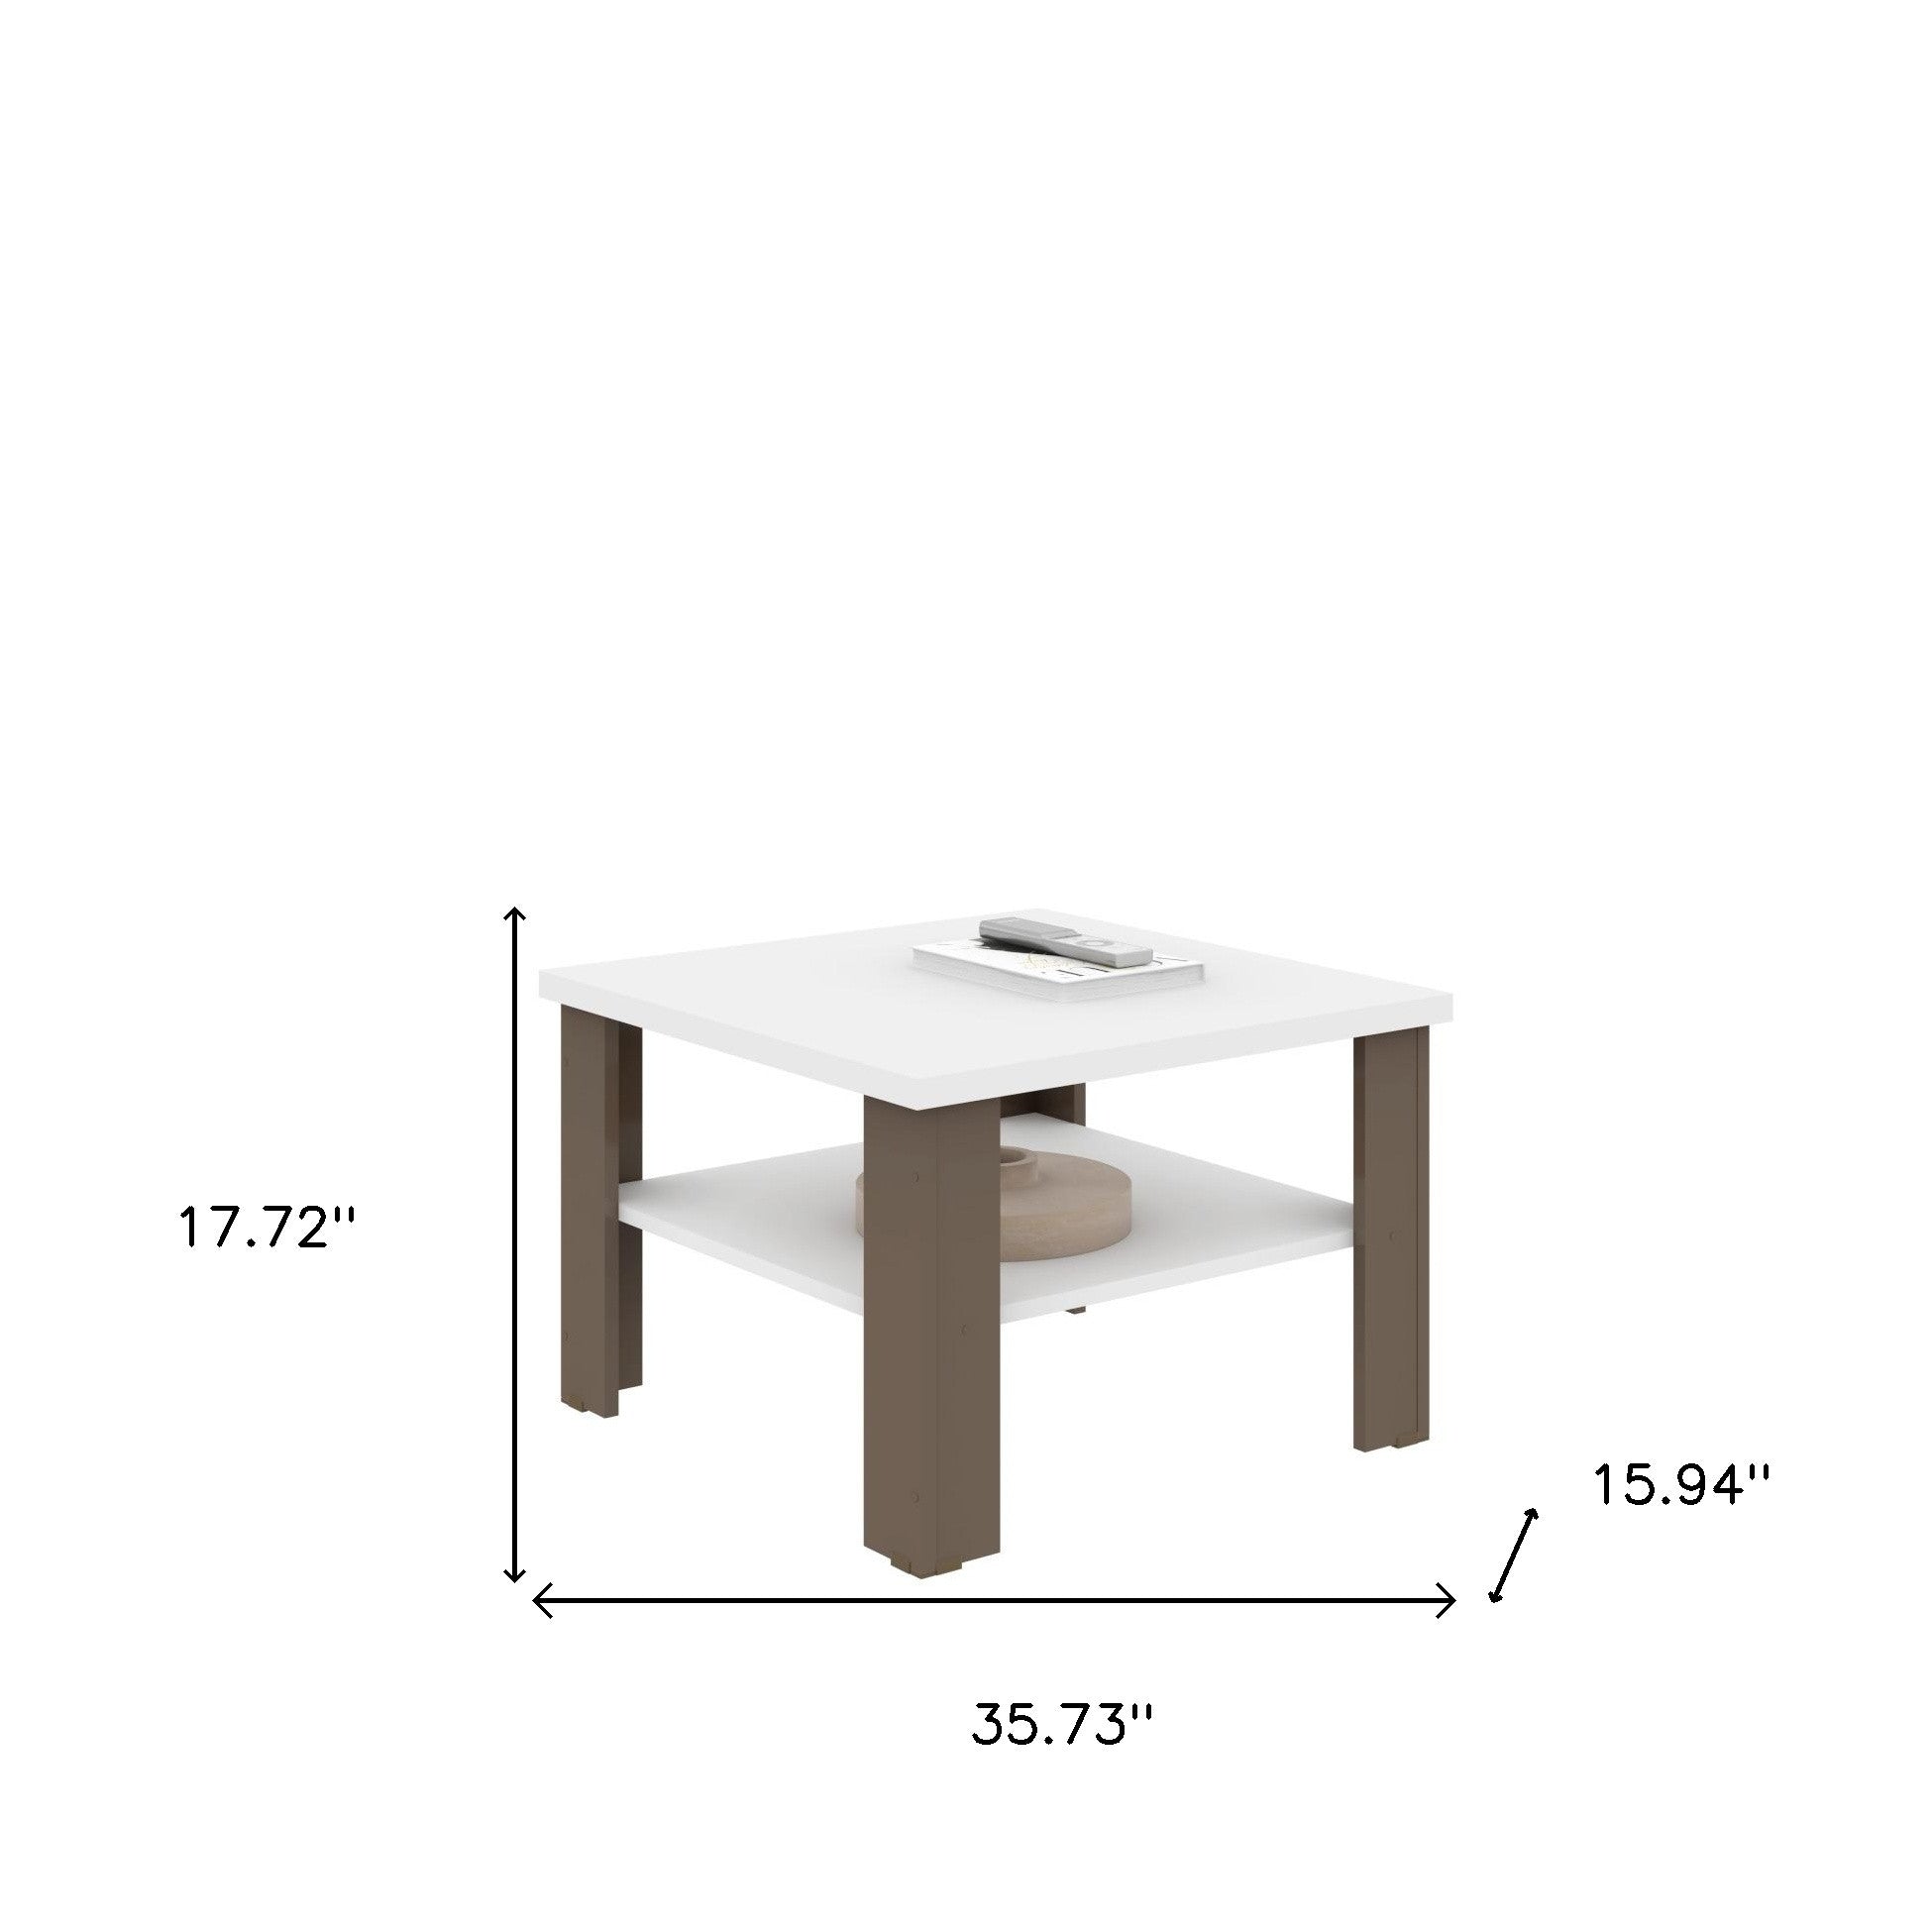 36" Brown And White End Table